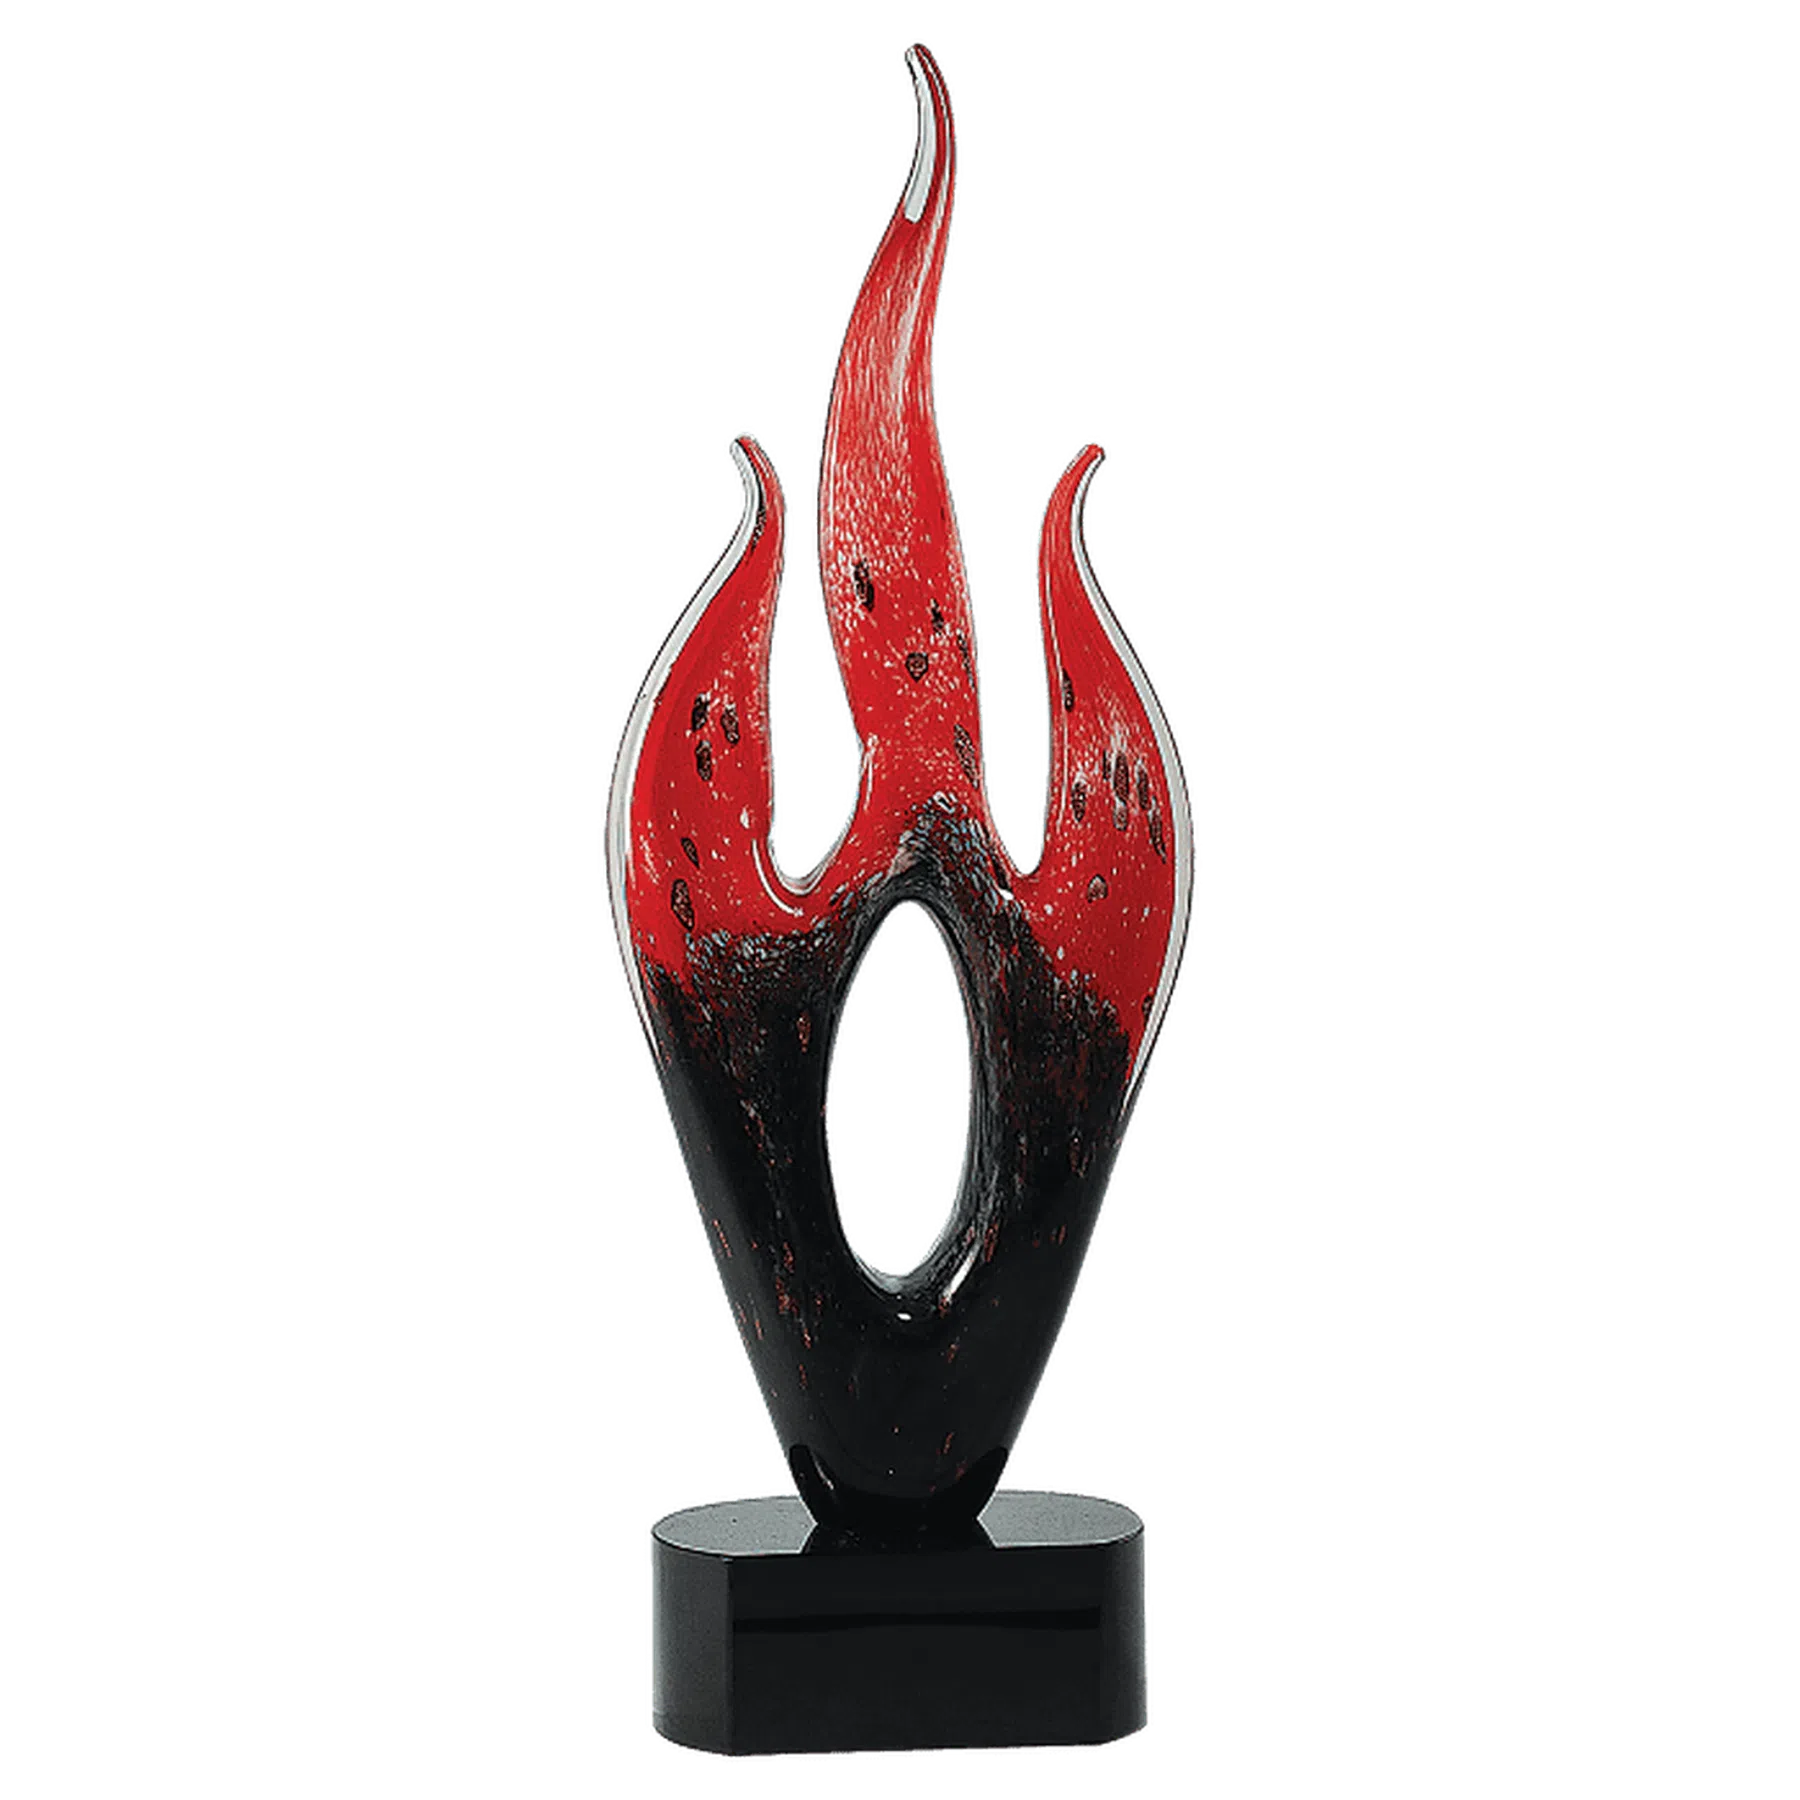 16" Red and Black Flame Art Glass Award Sculpture